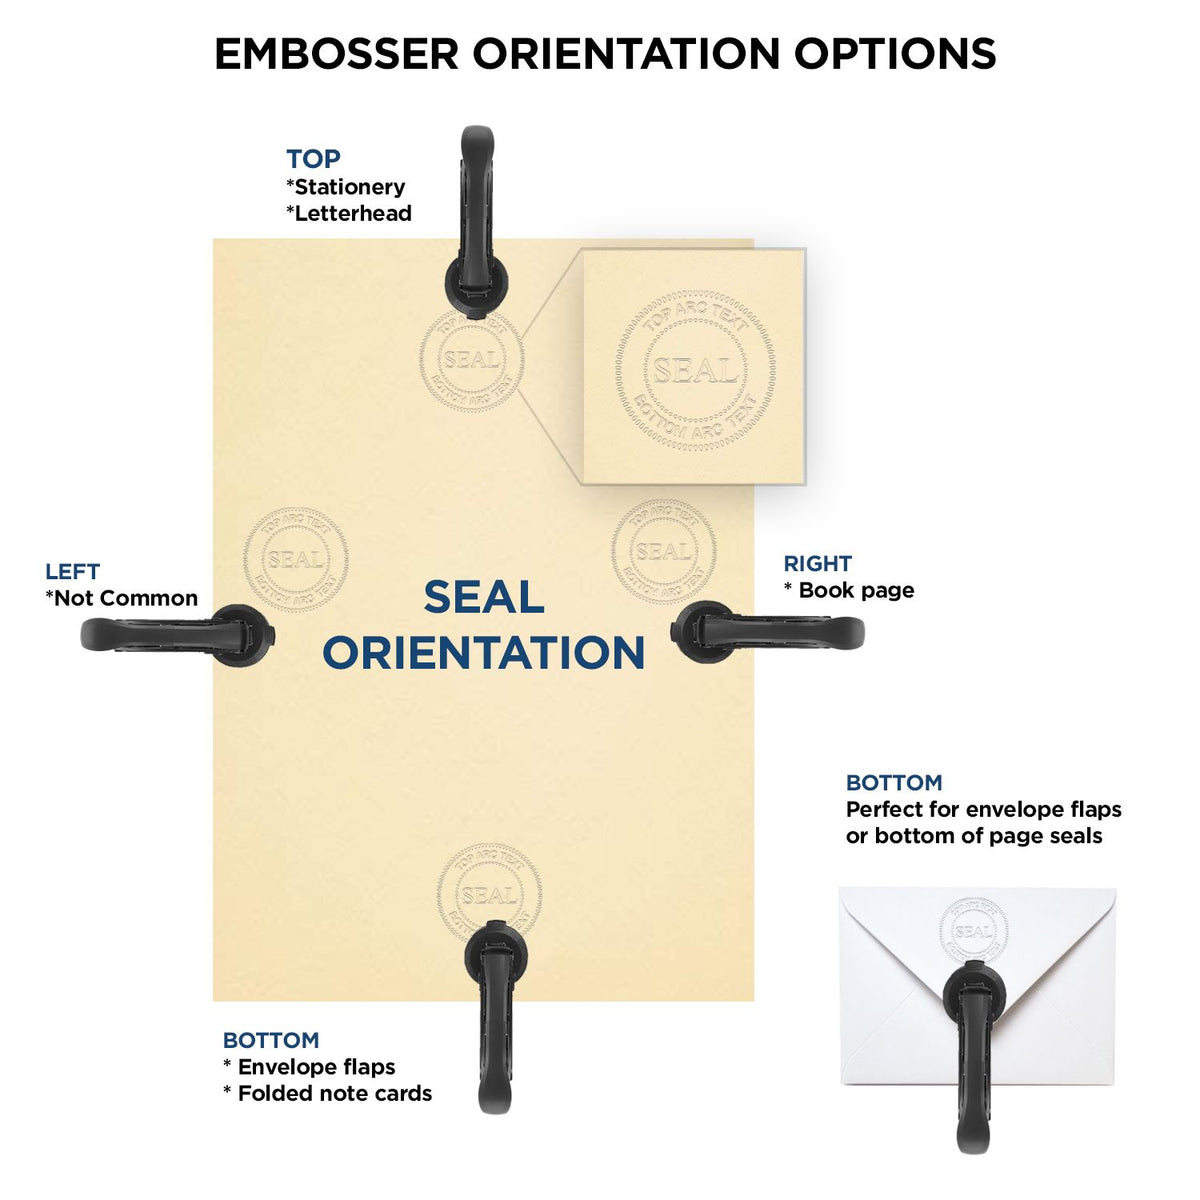 An infographic for the State of Connecticut Extended Long Reach Engineer Seal showing embosser orientation, this is showing examples of a top, bottom, right and left insert.